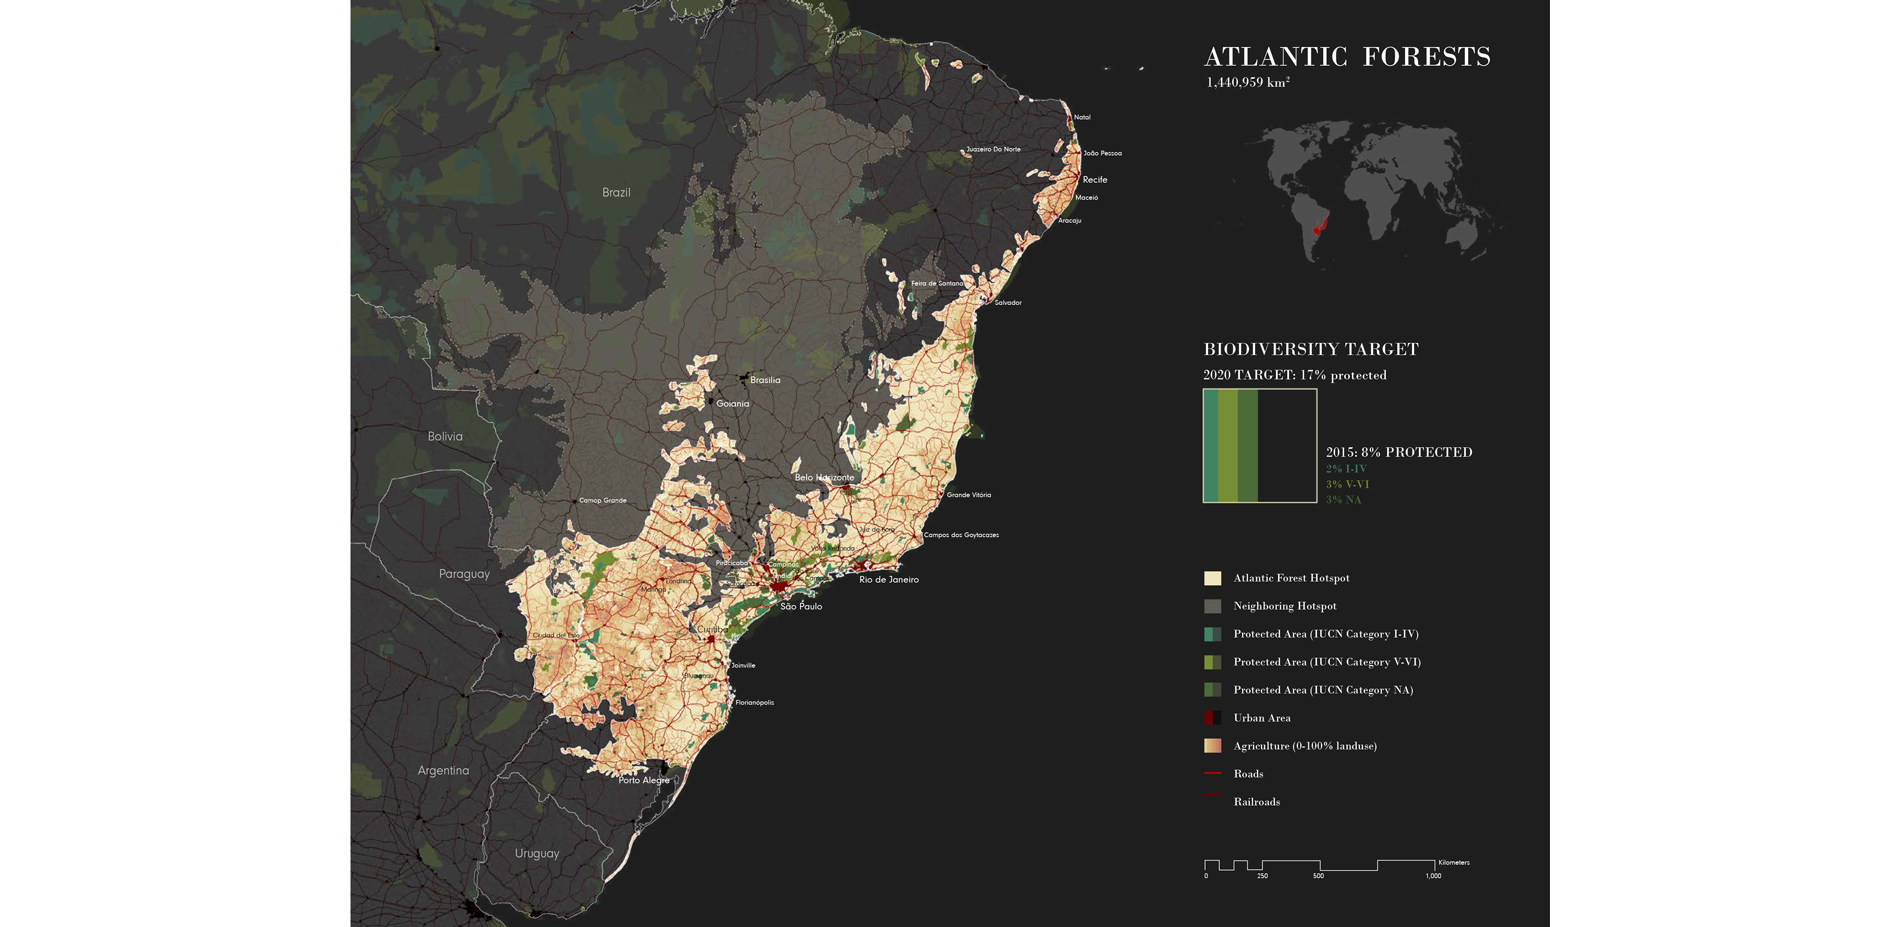 The Atlantic Forest hotspot showing how mch land is protected and how much land needs to be protected in order to meet the United Nations 17% (Convent…